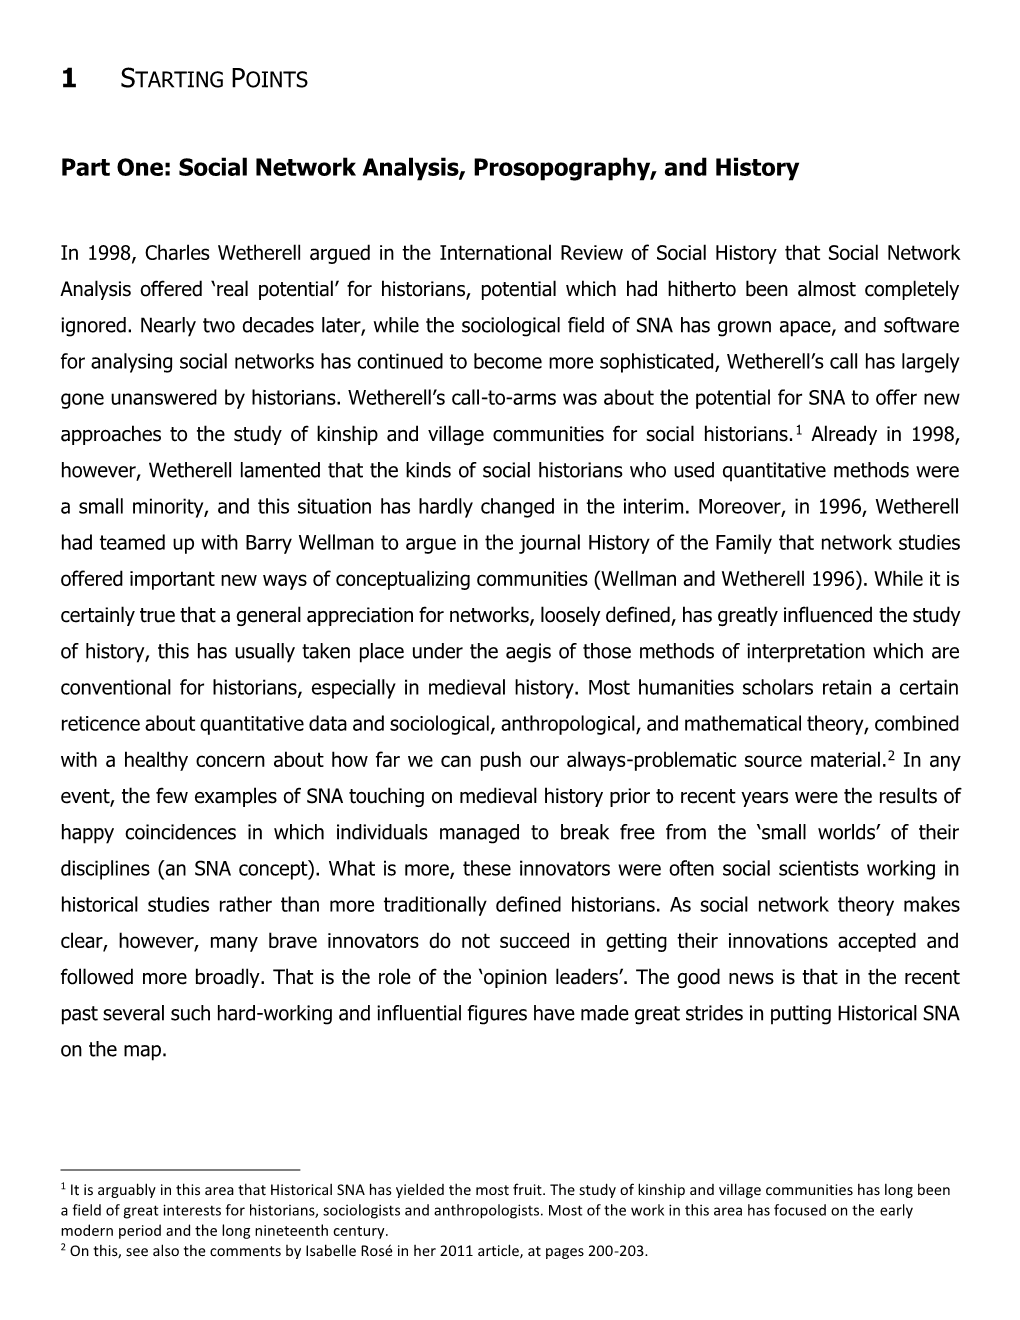 Part One: Social Network Analysis, Prosopography, and History